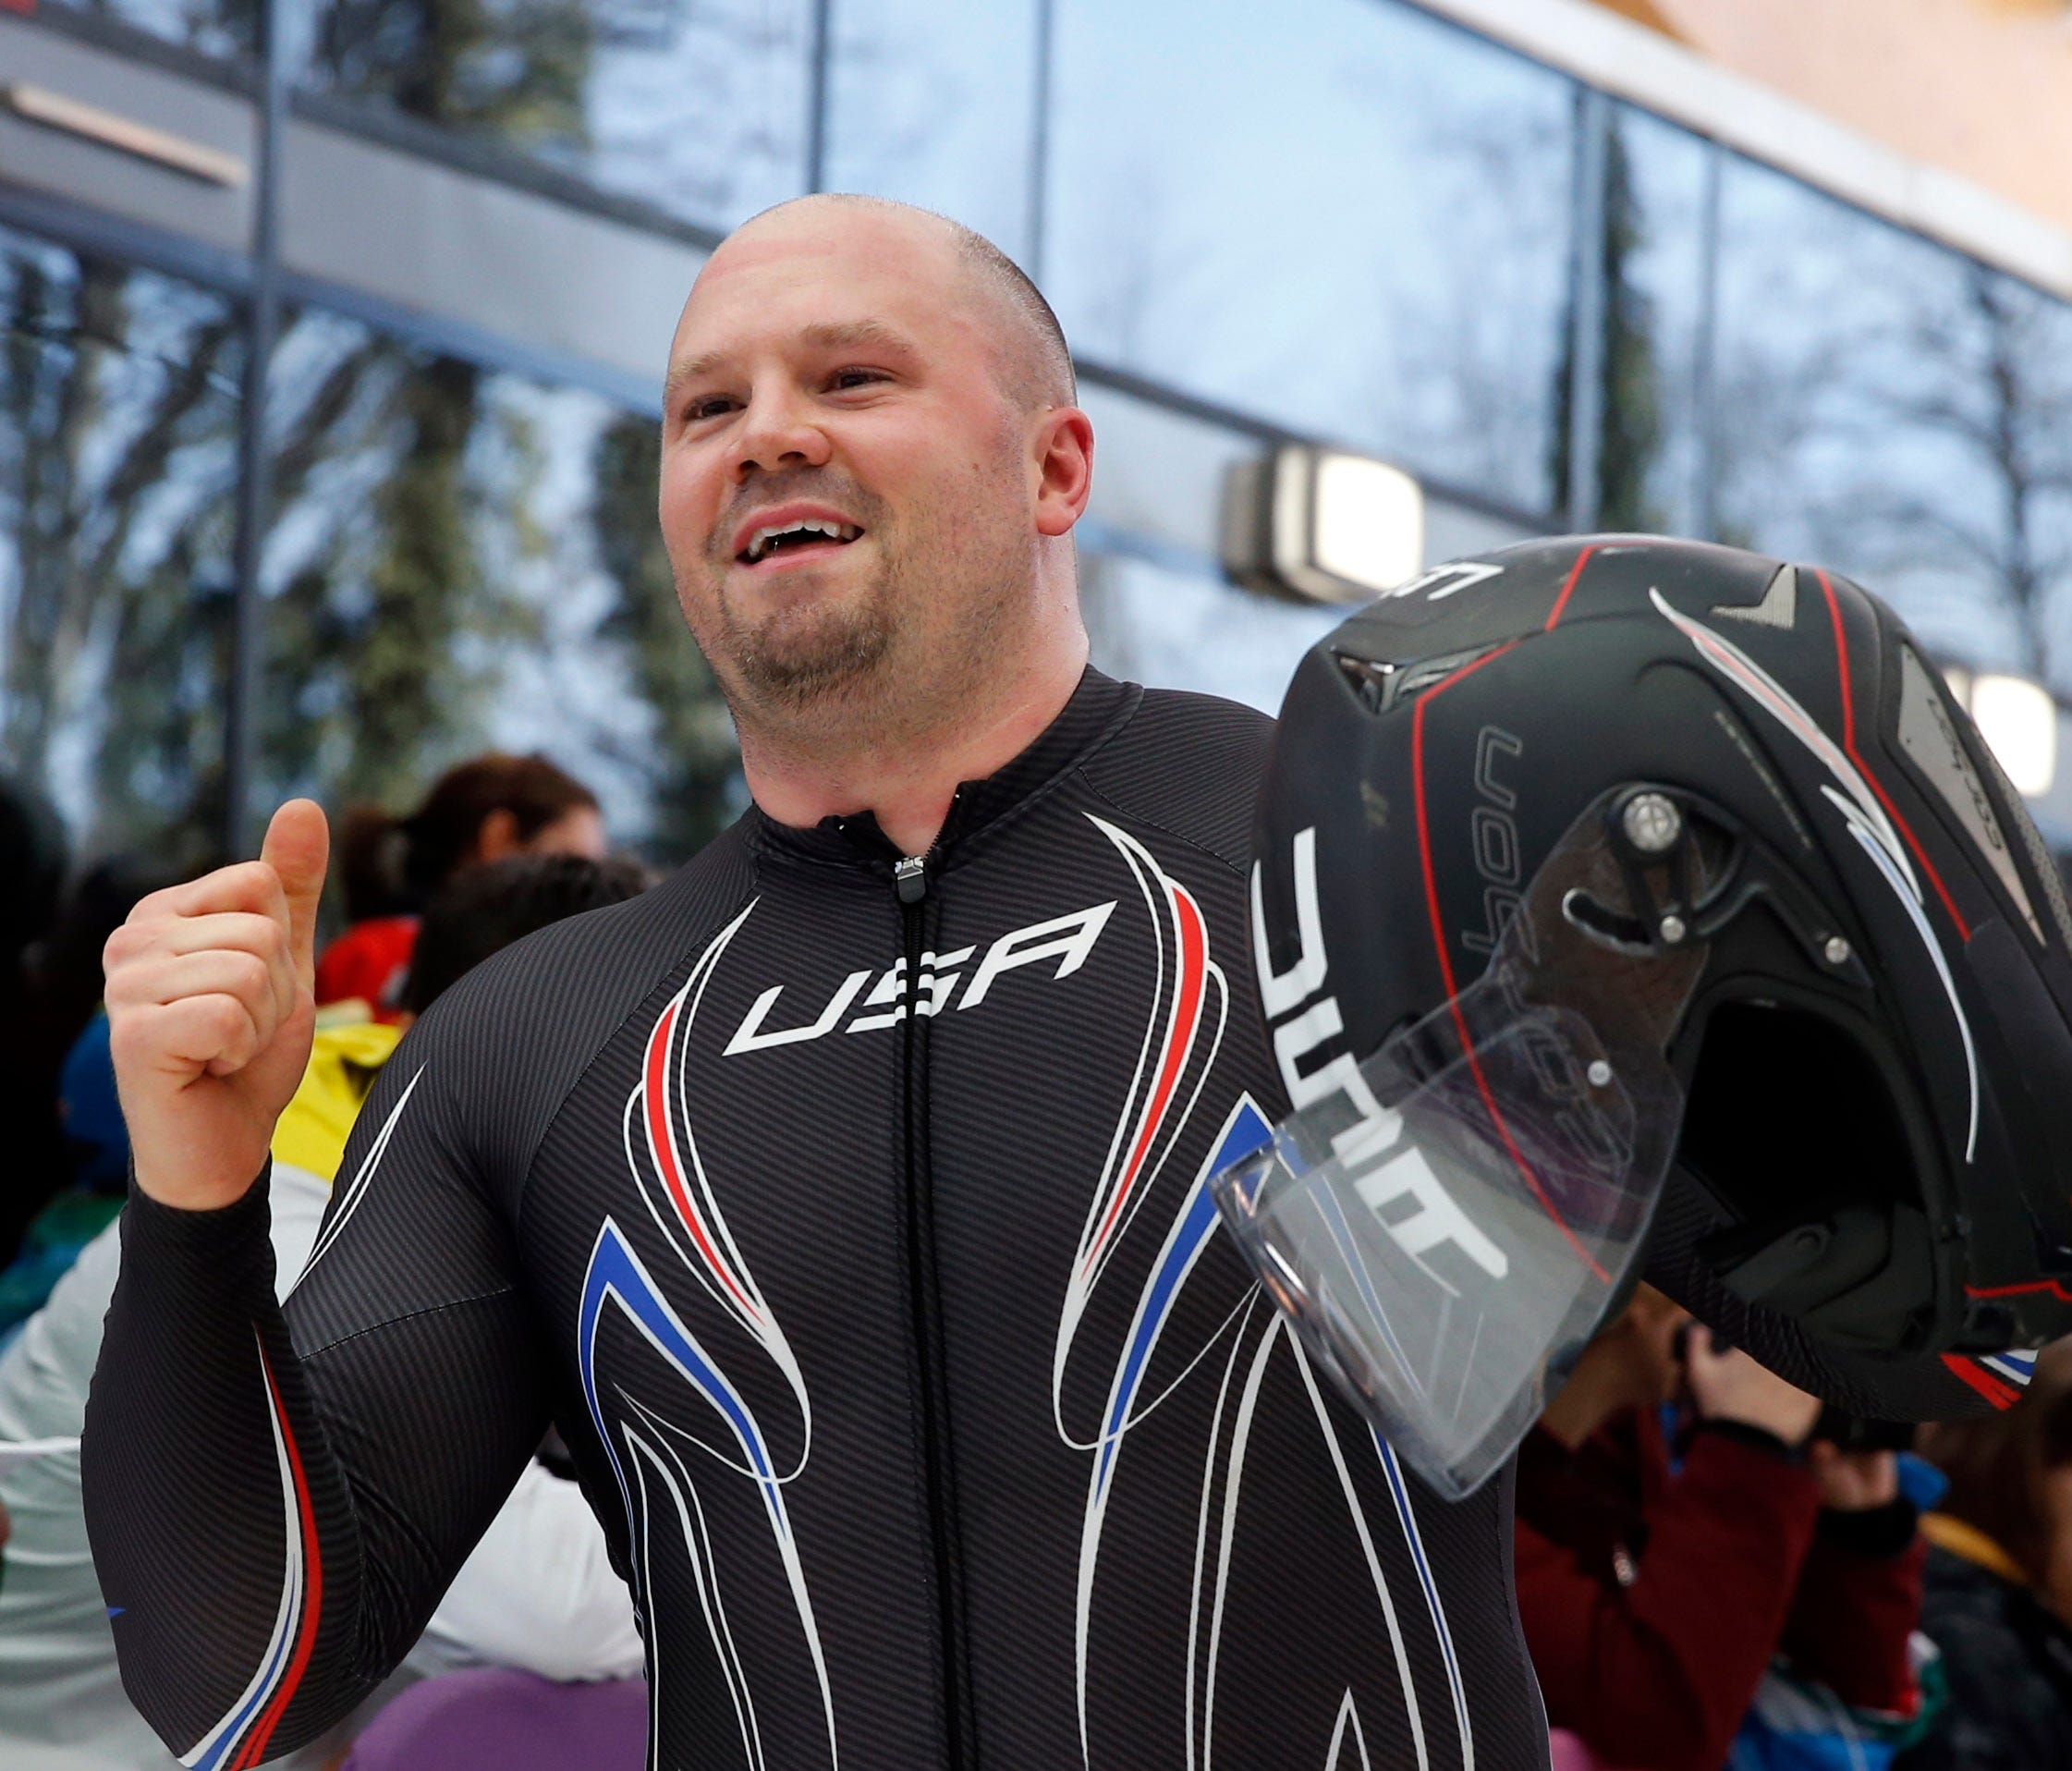 Steven Holcomb reacts after heat 4 of men's four-man bobsled during the Sochi 2014 Olympic Winter Games in 2014.